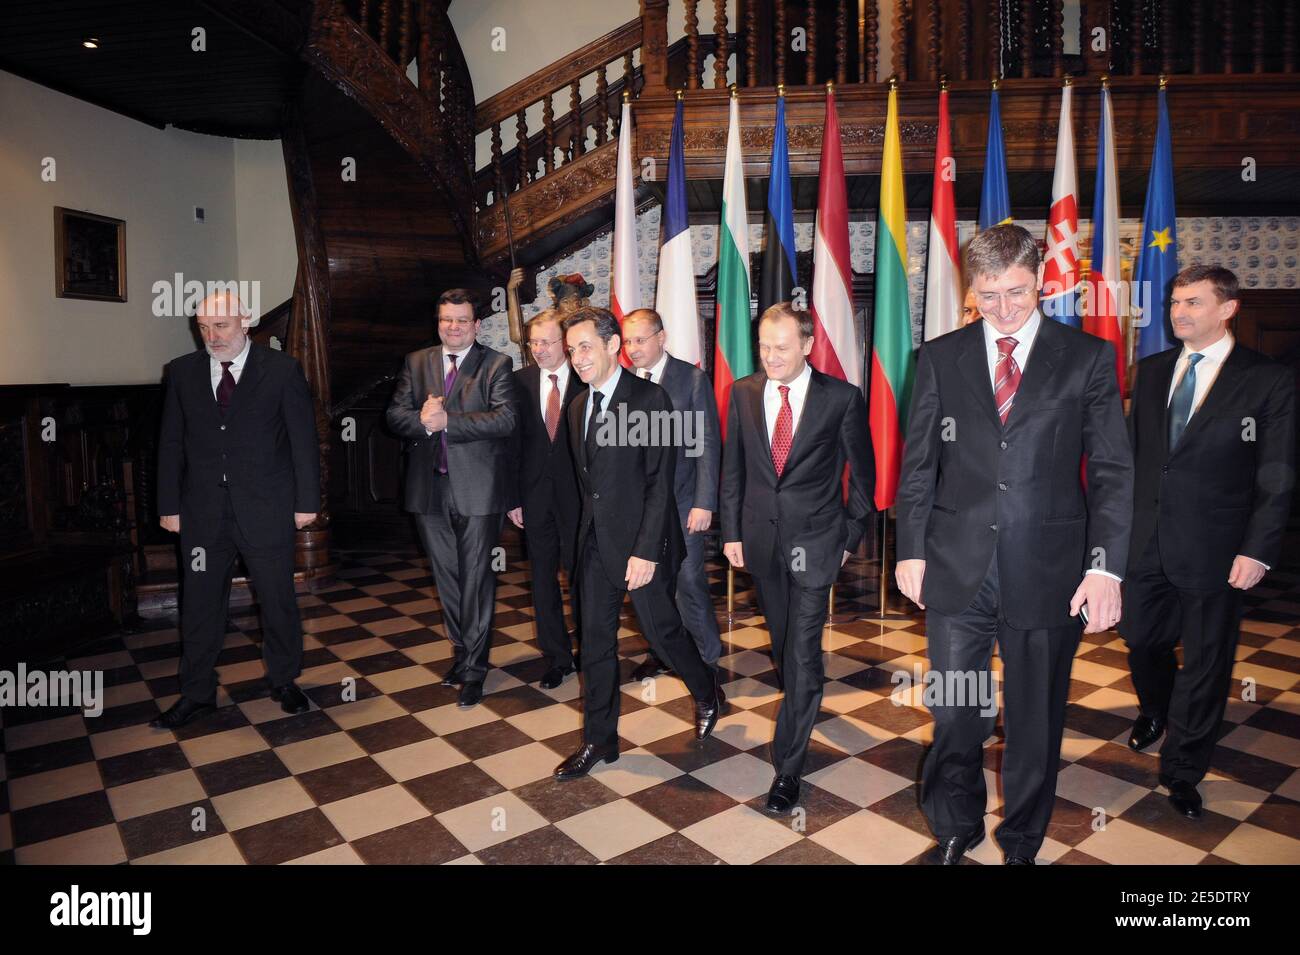 L-R : Latvian President Valdis Zatlers, an unidentified person, Lithuanian Prime Minister Gediminas Kirkilas, Bulgarian Prime Minister Sergei Stanishev, French President Nicolas Sarkozy (acting as EU president), Polish Prime Minister Donald Tusk, Hungarian Prime Minister Ferenc Gyurcsany, Romanian Prime Minister Calin Popescu Tariceanu and Estonian Prime Minister Andrus Ansip pose for a picture during a climate summit in Gdansk, Poland on December 6, 2008. Photo by Ammar Abd Rabbo/ABACAPRESS.COM Stock Photo